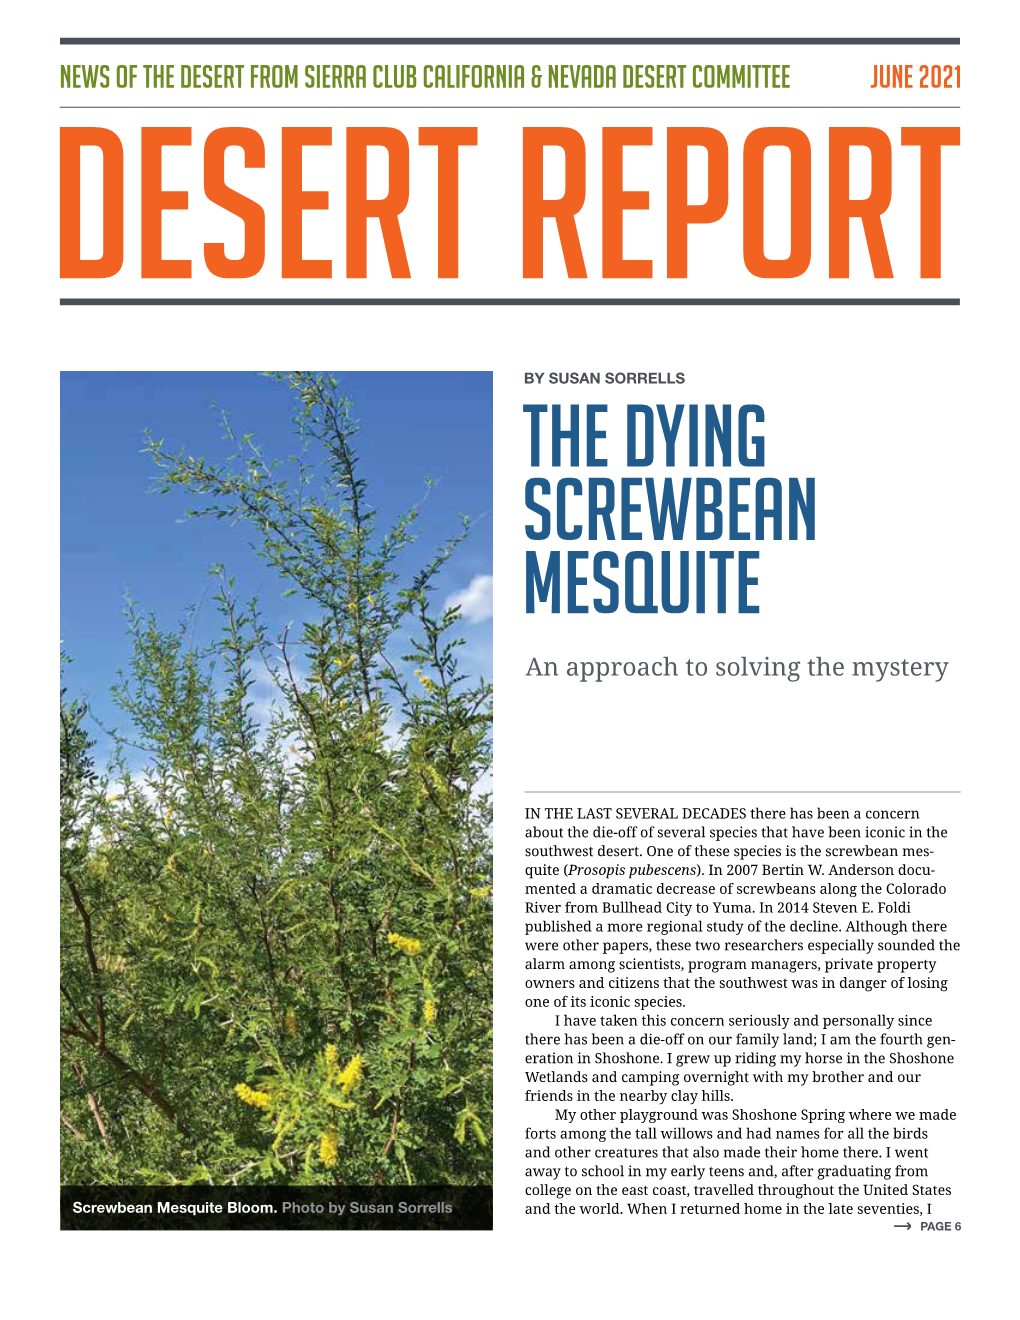 The Dying Screwbean Mesquite